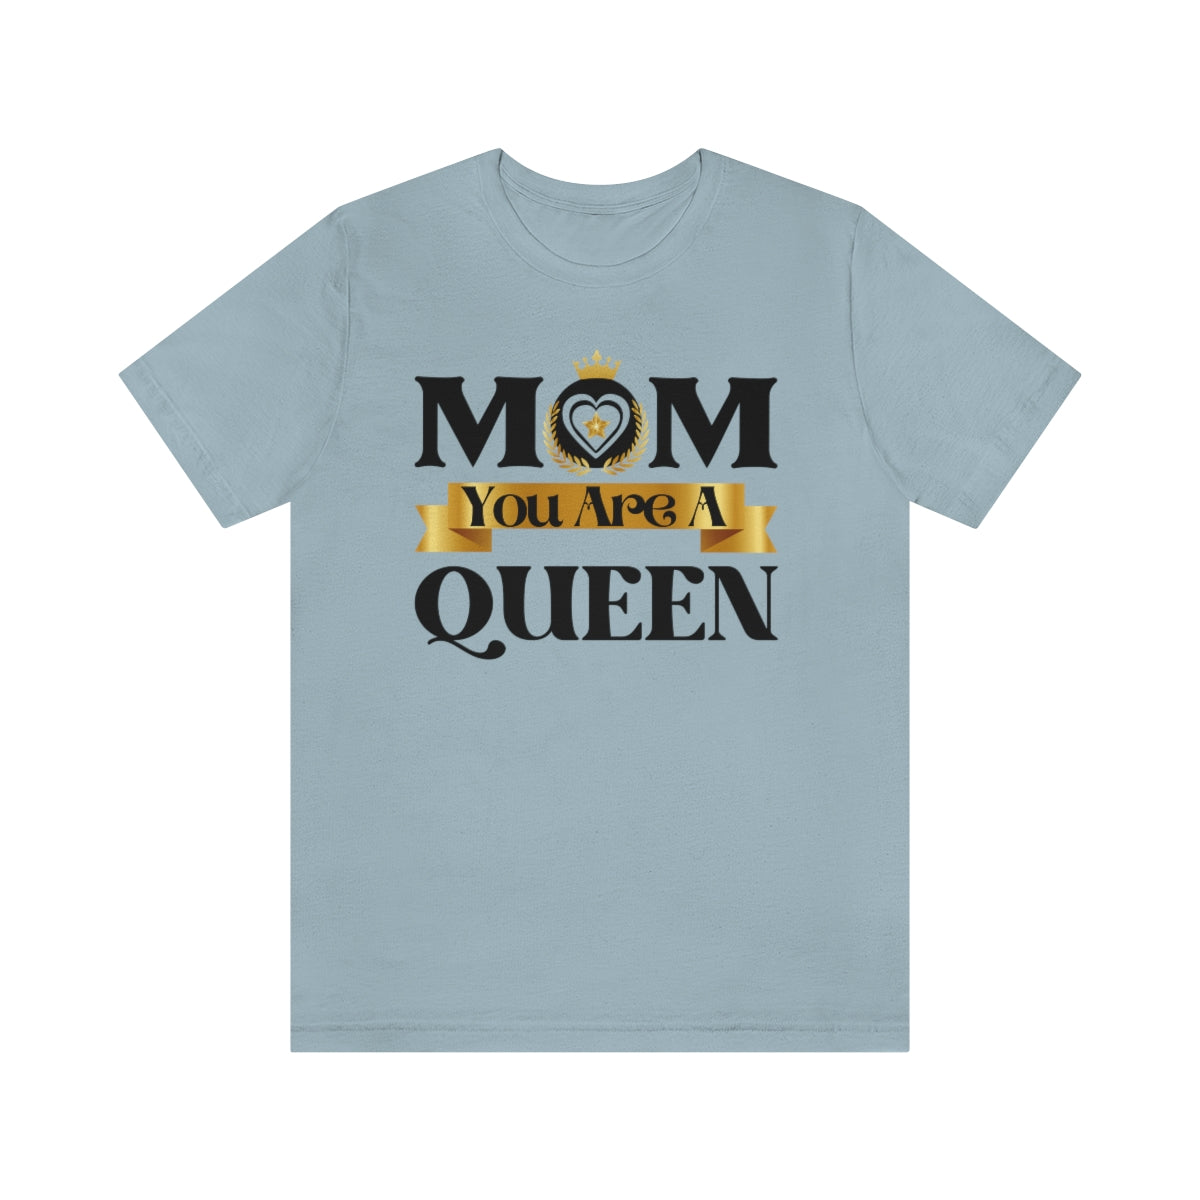 Mom You Are A Queen T-Shirt